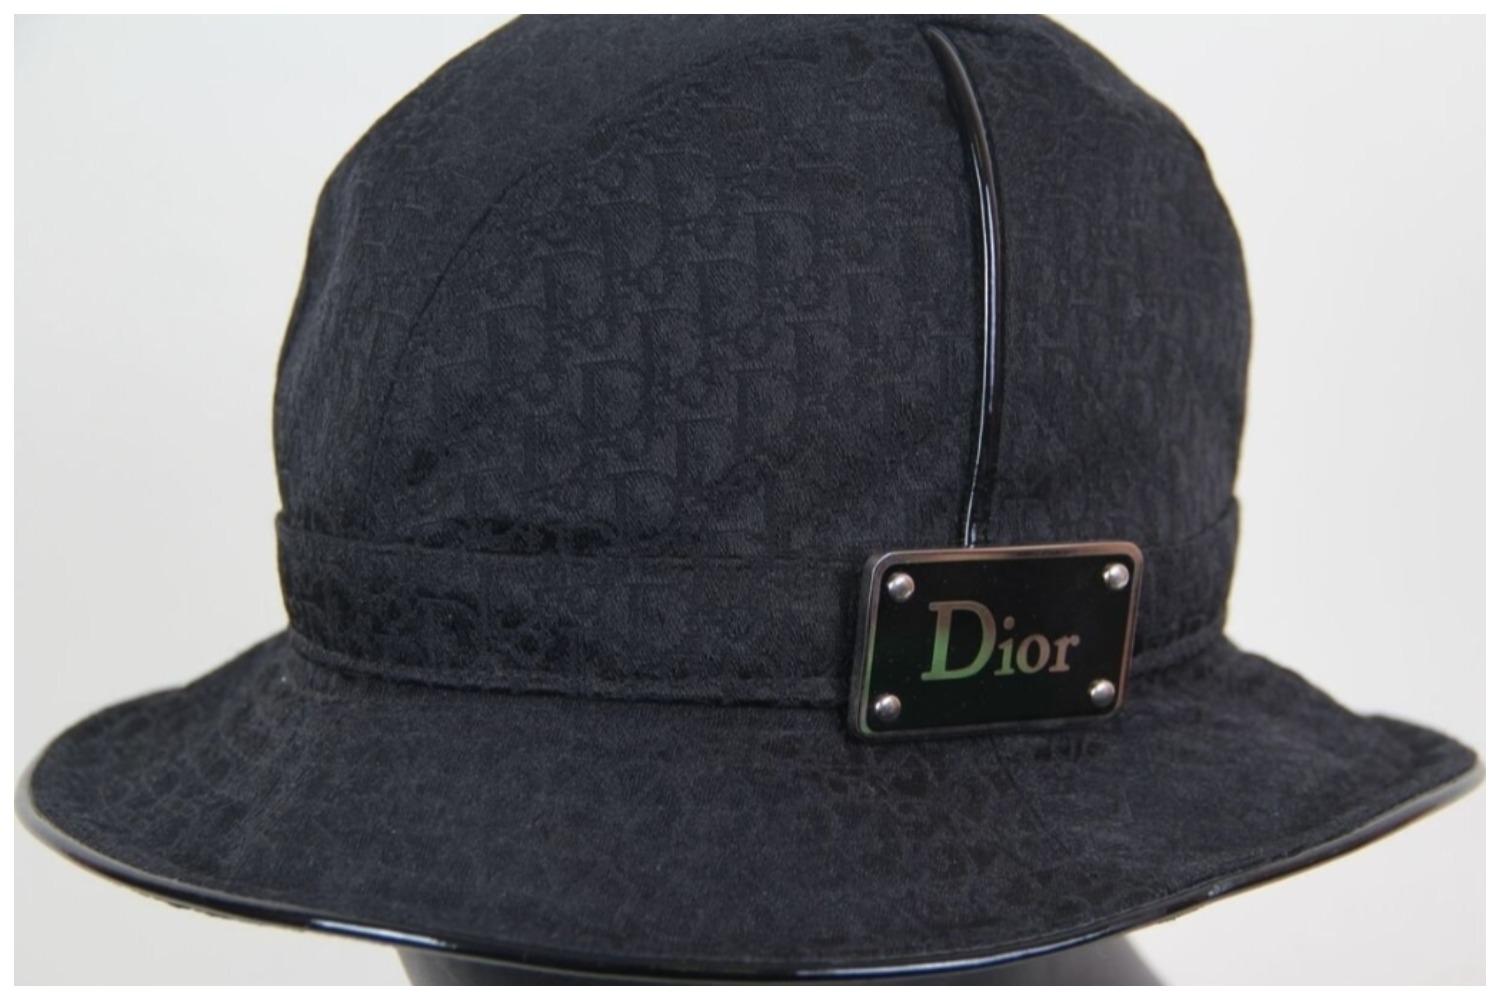 Dior Galliano Oblique Jacquard Bucket Hat Diorissimo Trotter
A black canvas bucket hat decorated with the iconic Diorissimo print and a logo plaque created by John Galliano for Christian Dior in 2004.
Collection: 2004
Christian Dior style: